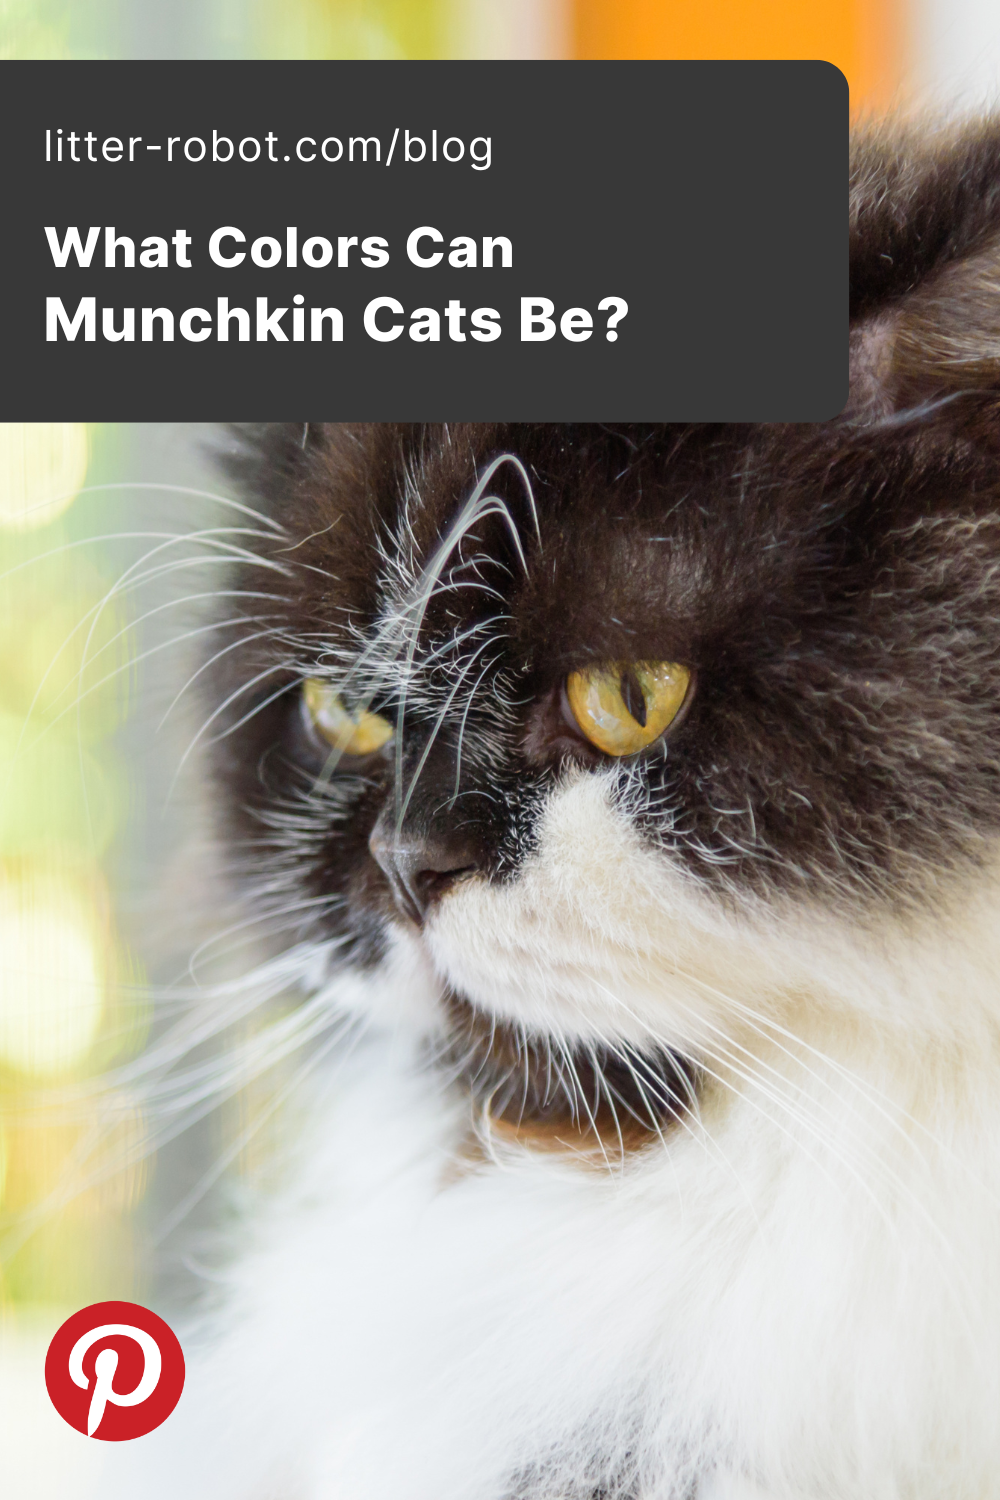 What Colors Can Munchkin Cats Be?